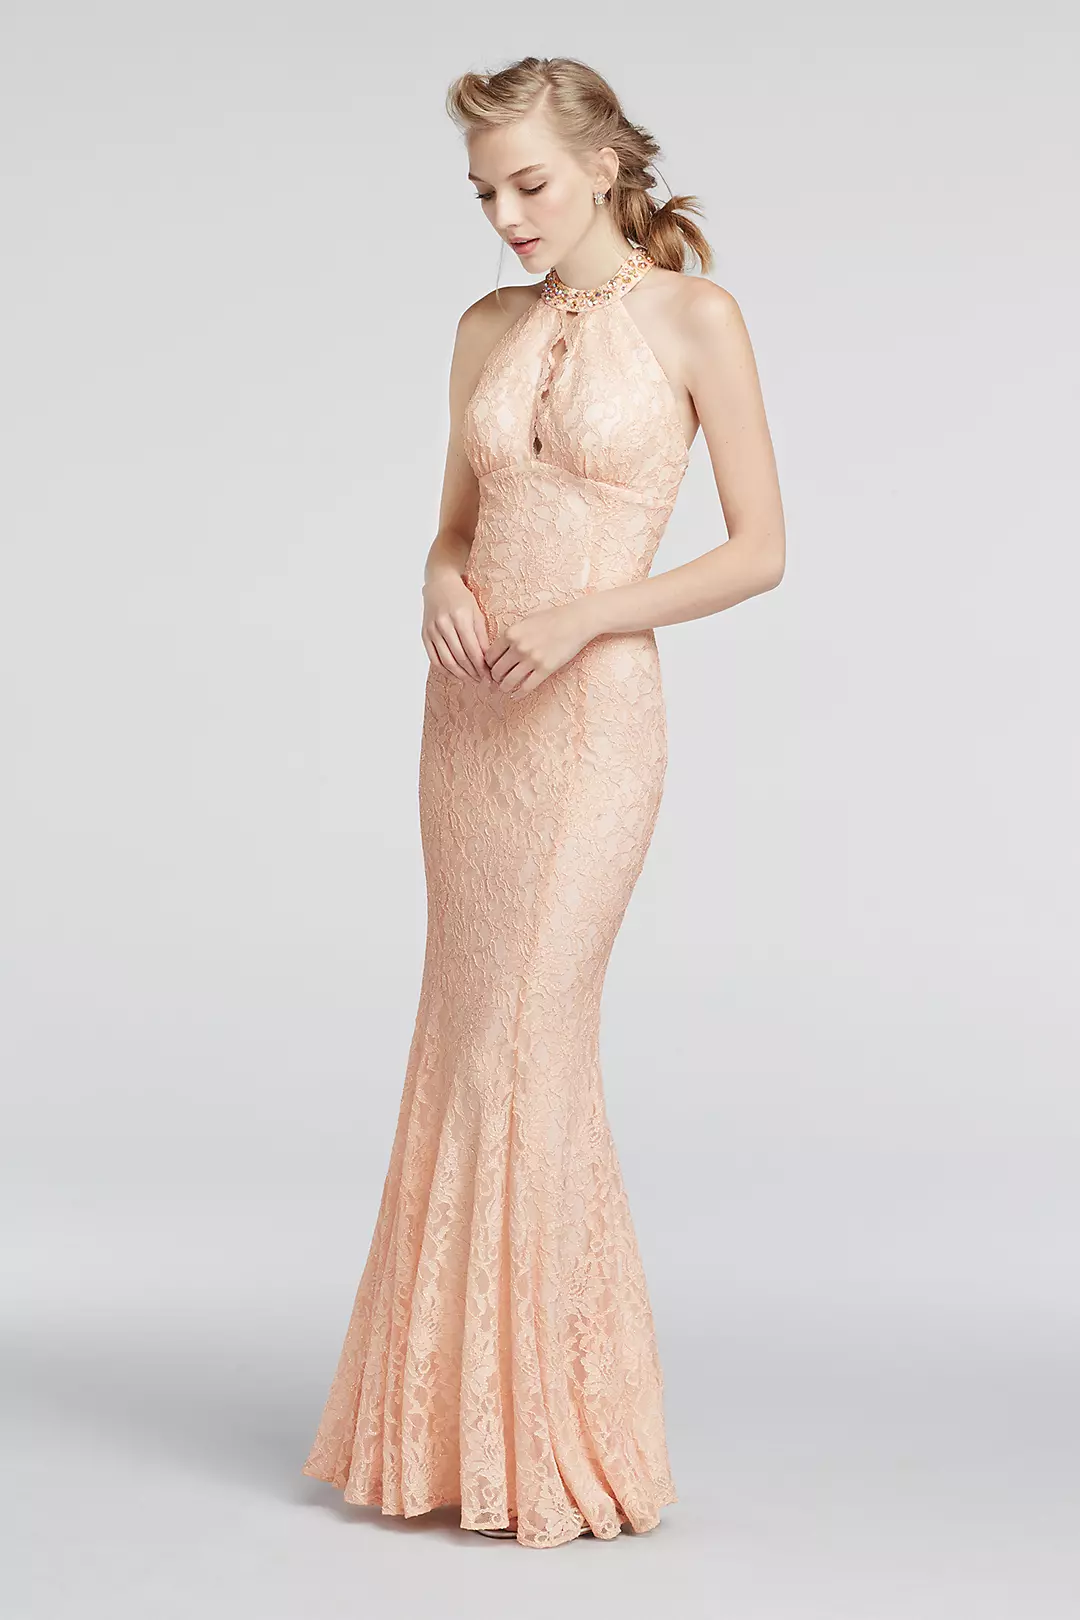 Halter Lace Prom Dress with Scalloped Keyhole  Image